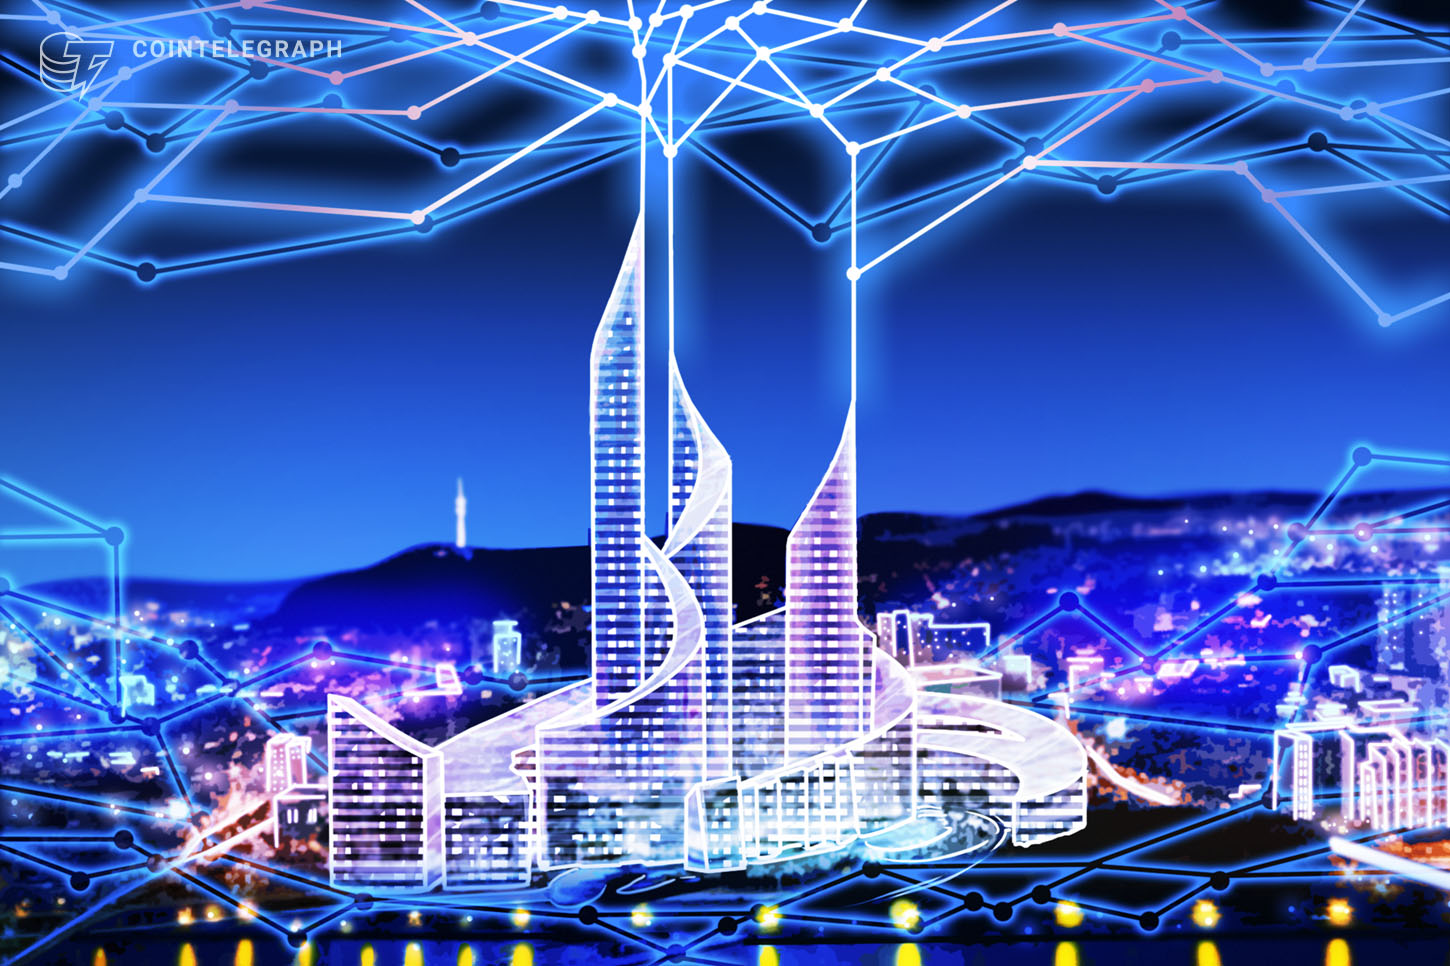 4 of the Prime 5 South Korean Banks to Supply Crypto Companies